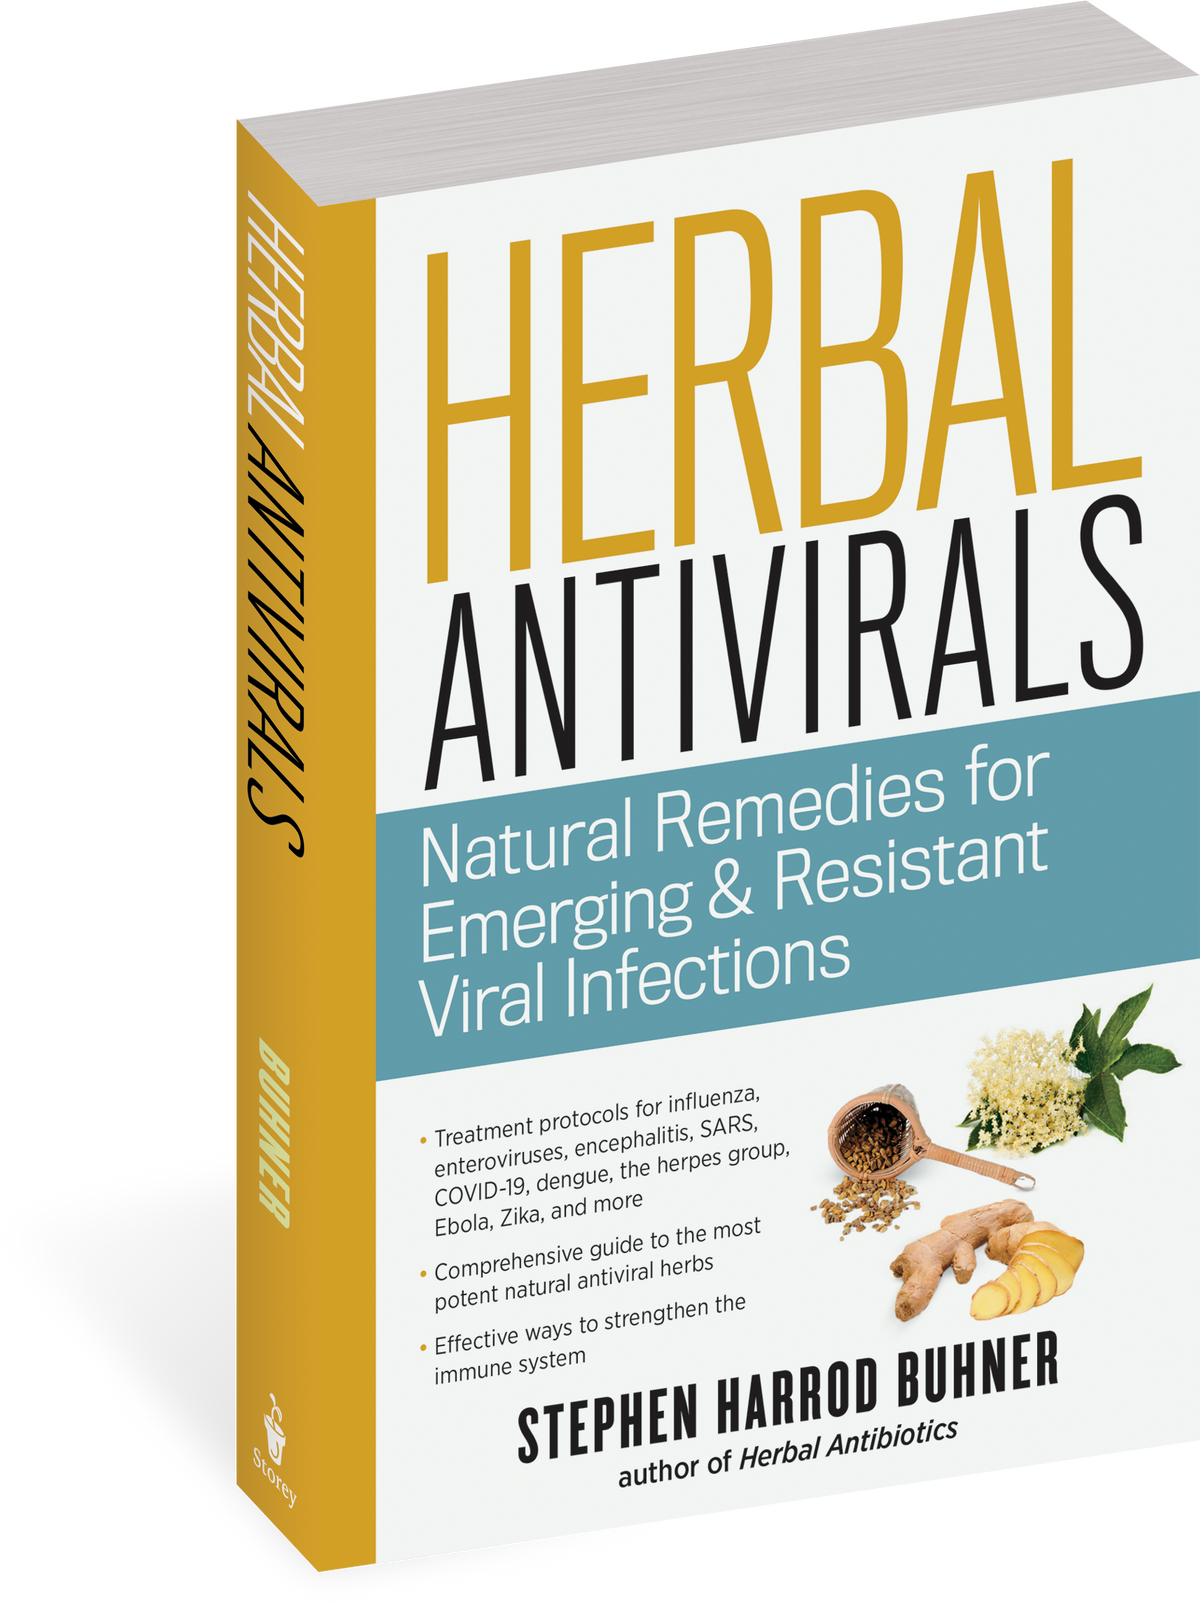 Herbal Antivirals Natural Remedies for Emerging and Resistant Viral Infections by Stephan Harrod Buhner